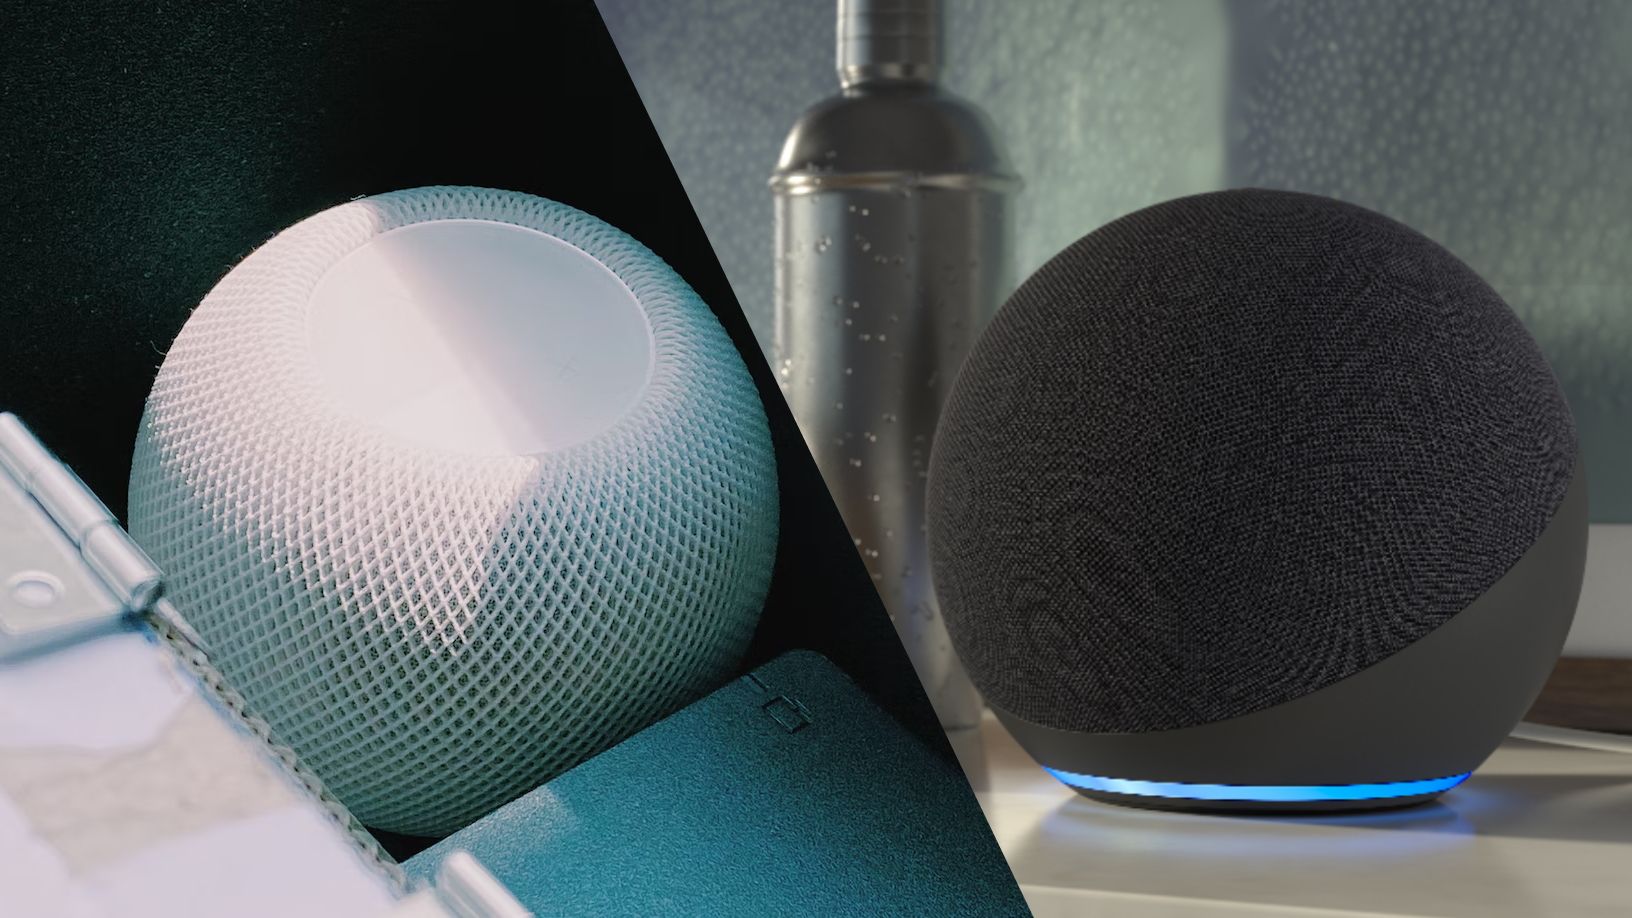 A HomePod mini and Amazon Echo side-by-side